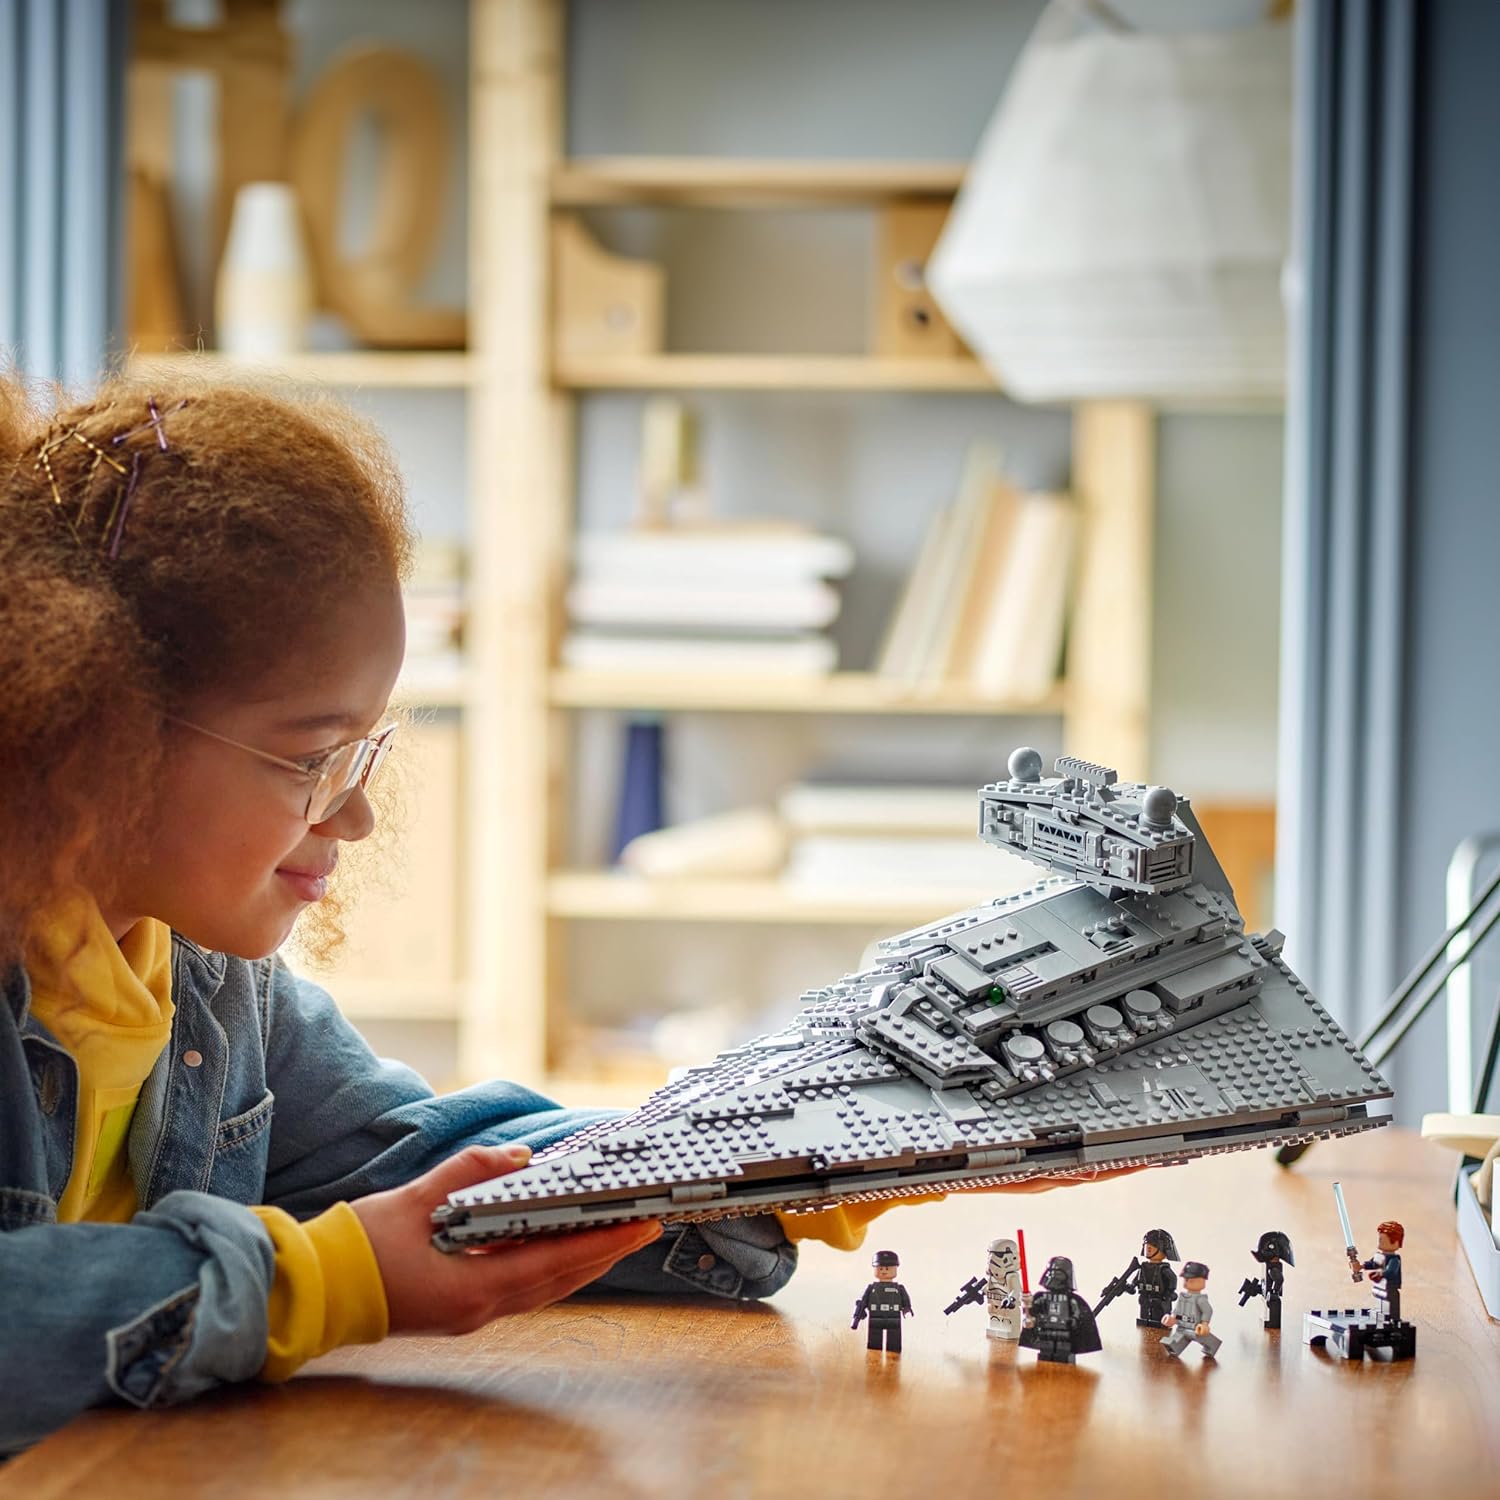 a young girl holds a completed Lego Star Destroyer showing the iconic Star Wars spaceship in Lego form. Seven minifigure characters are on a desk underneath the toy.